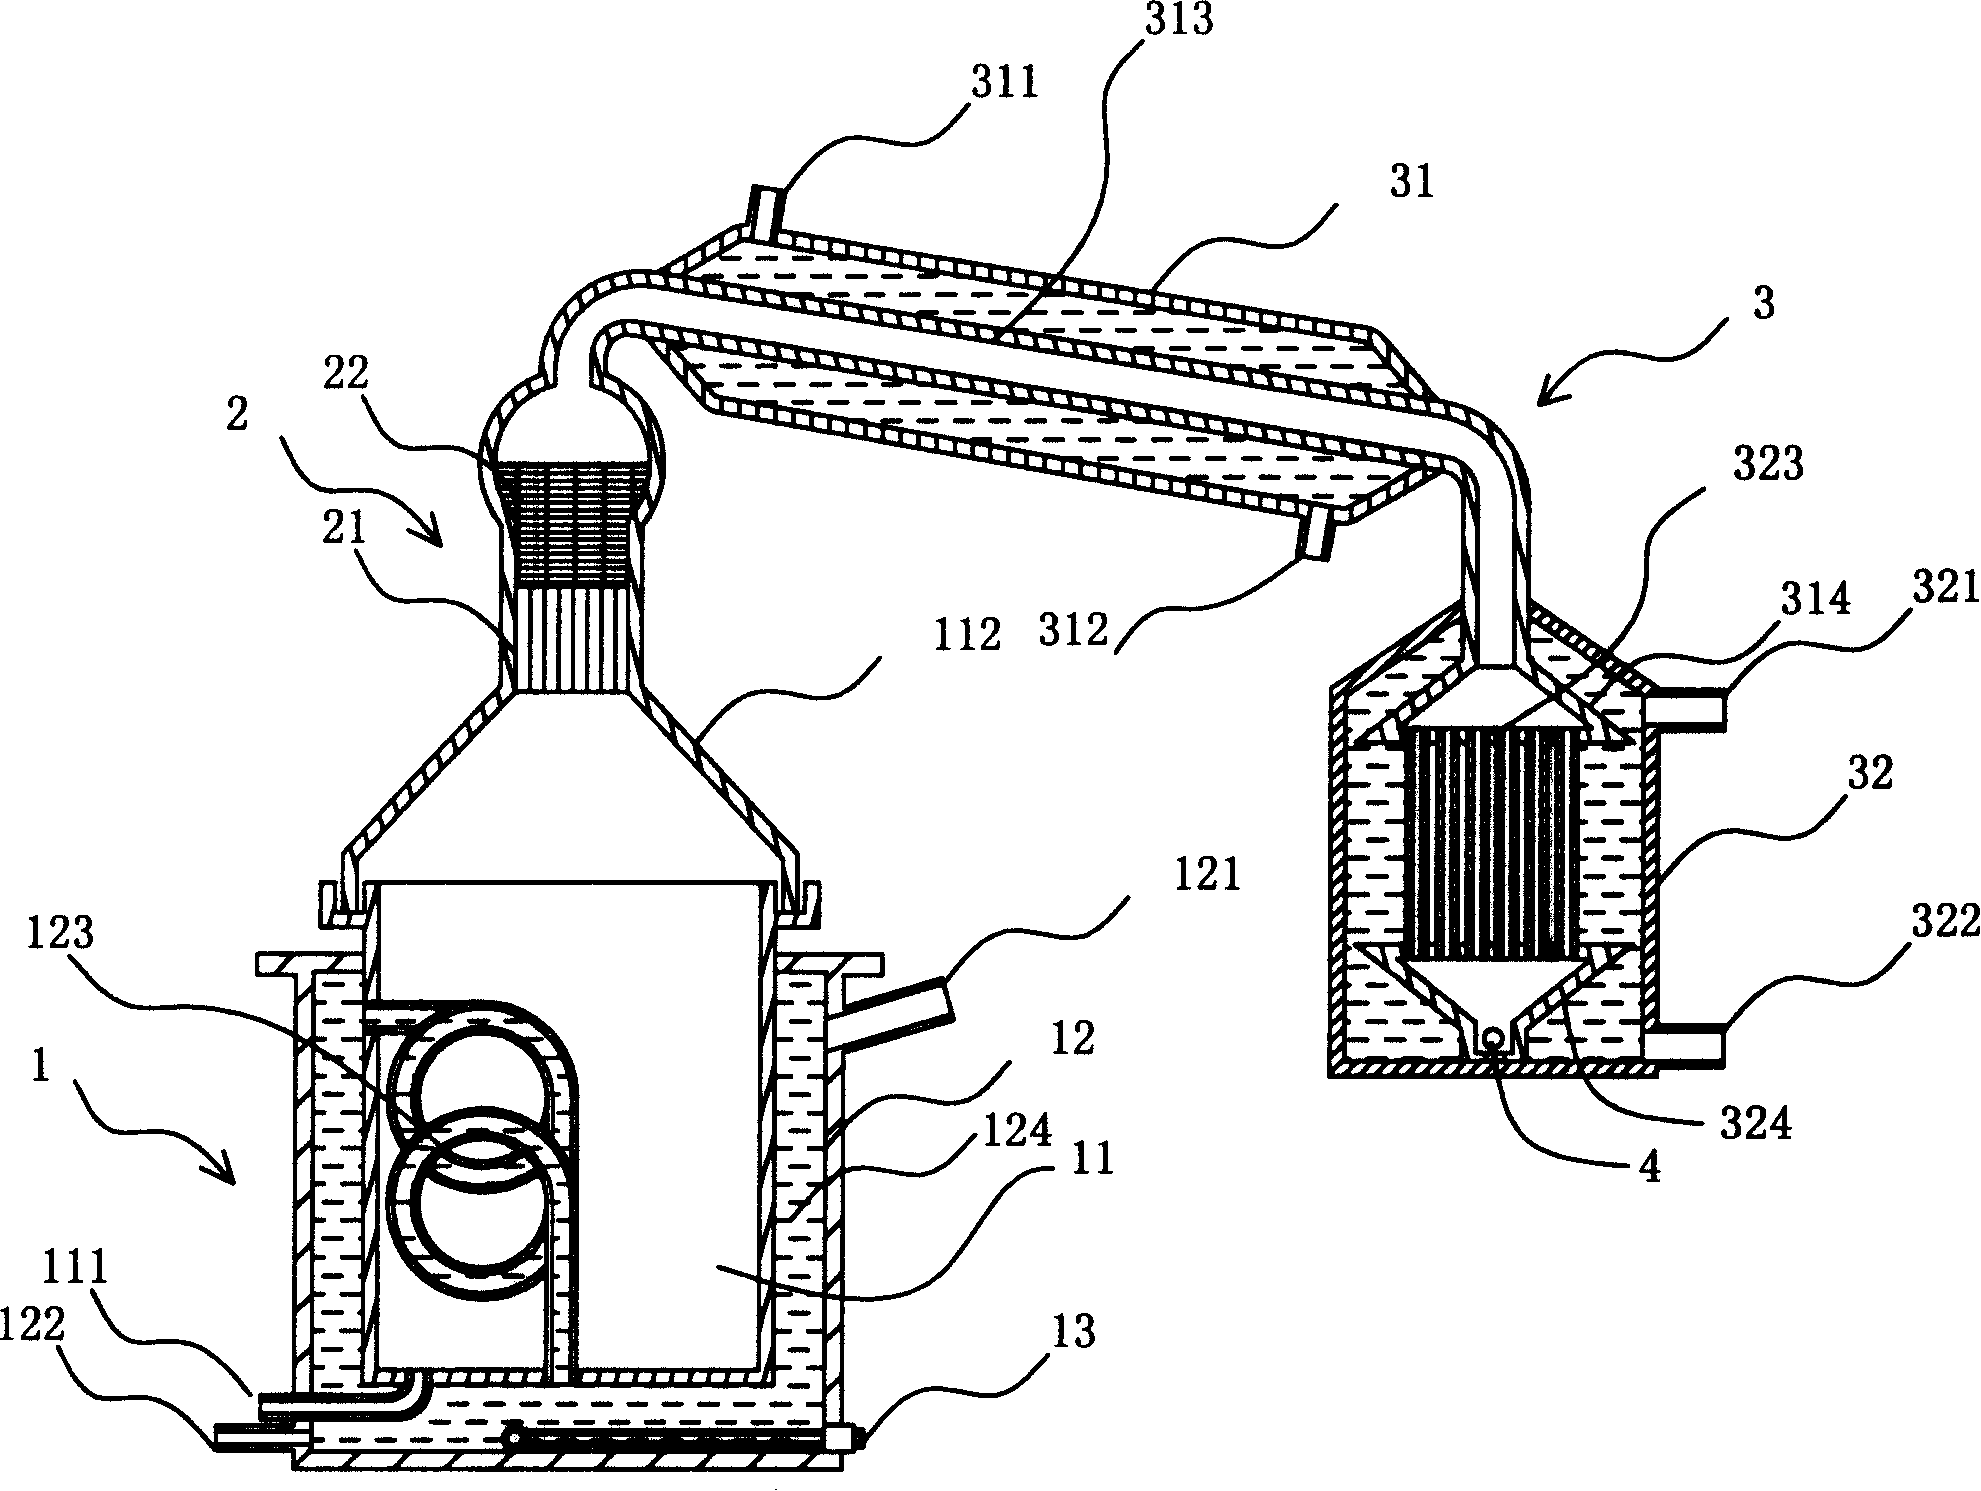 Wine distillation equipment with filtration system